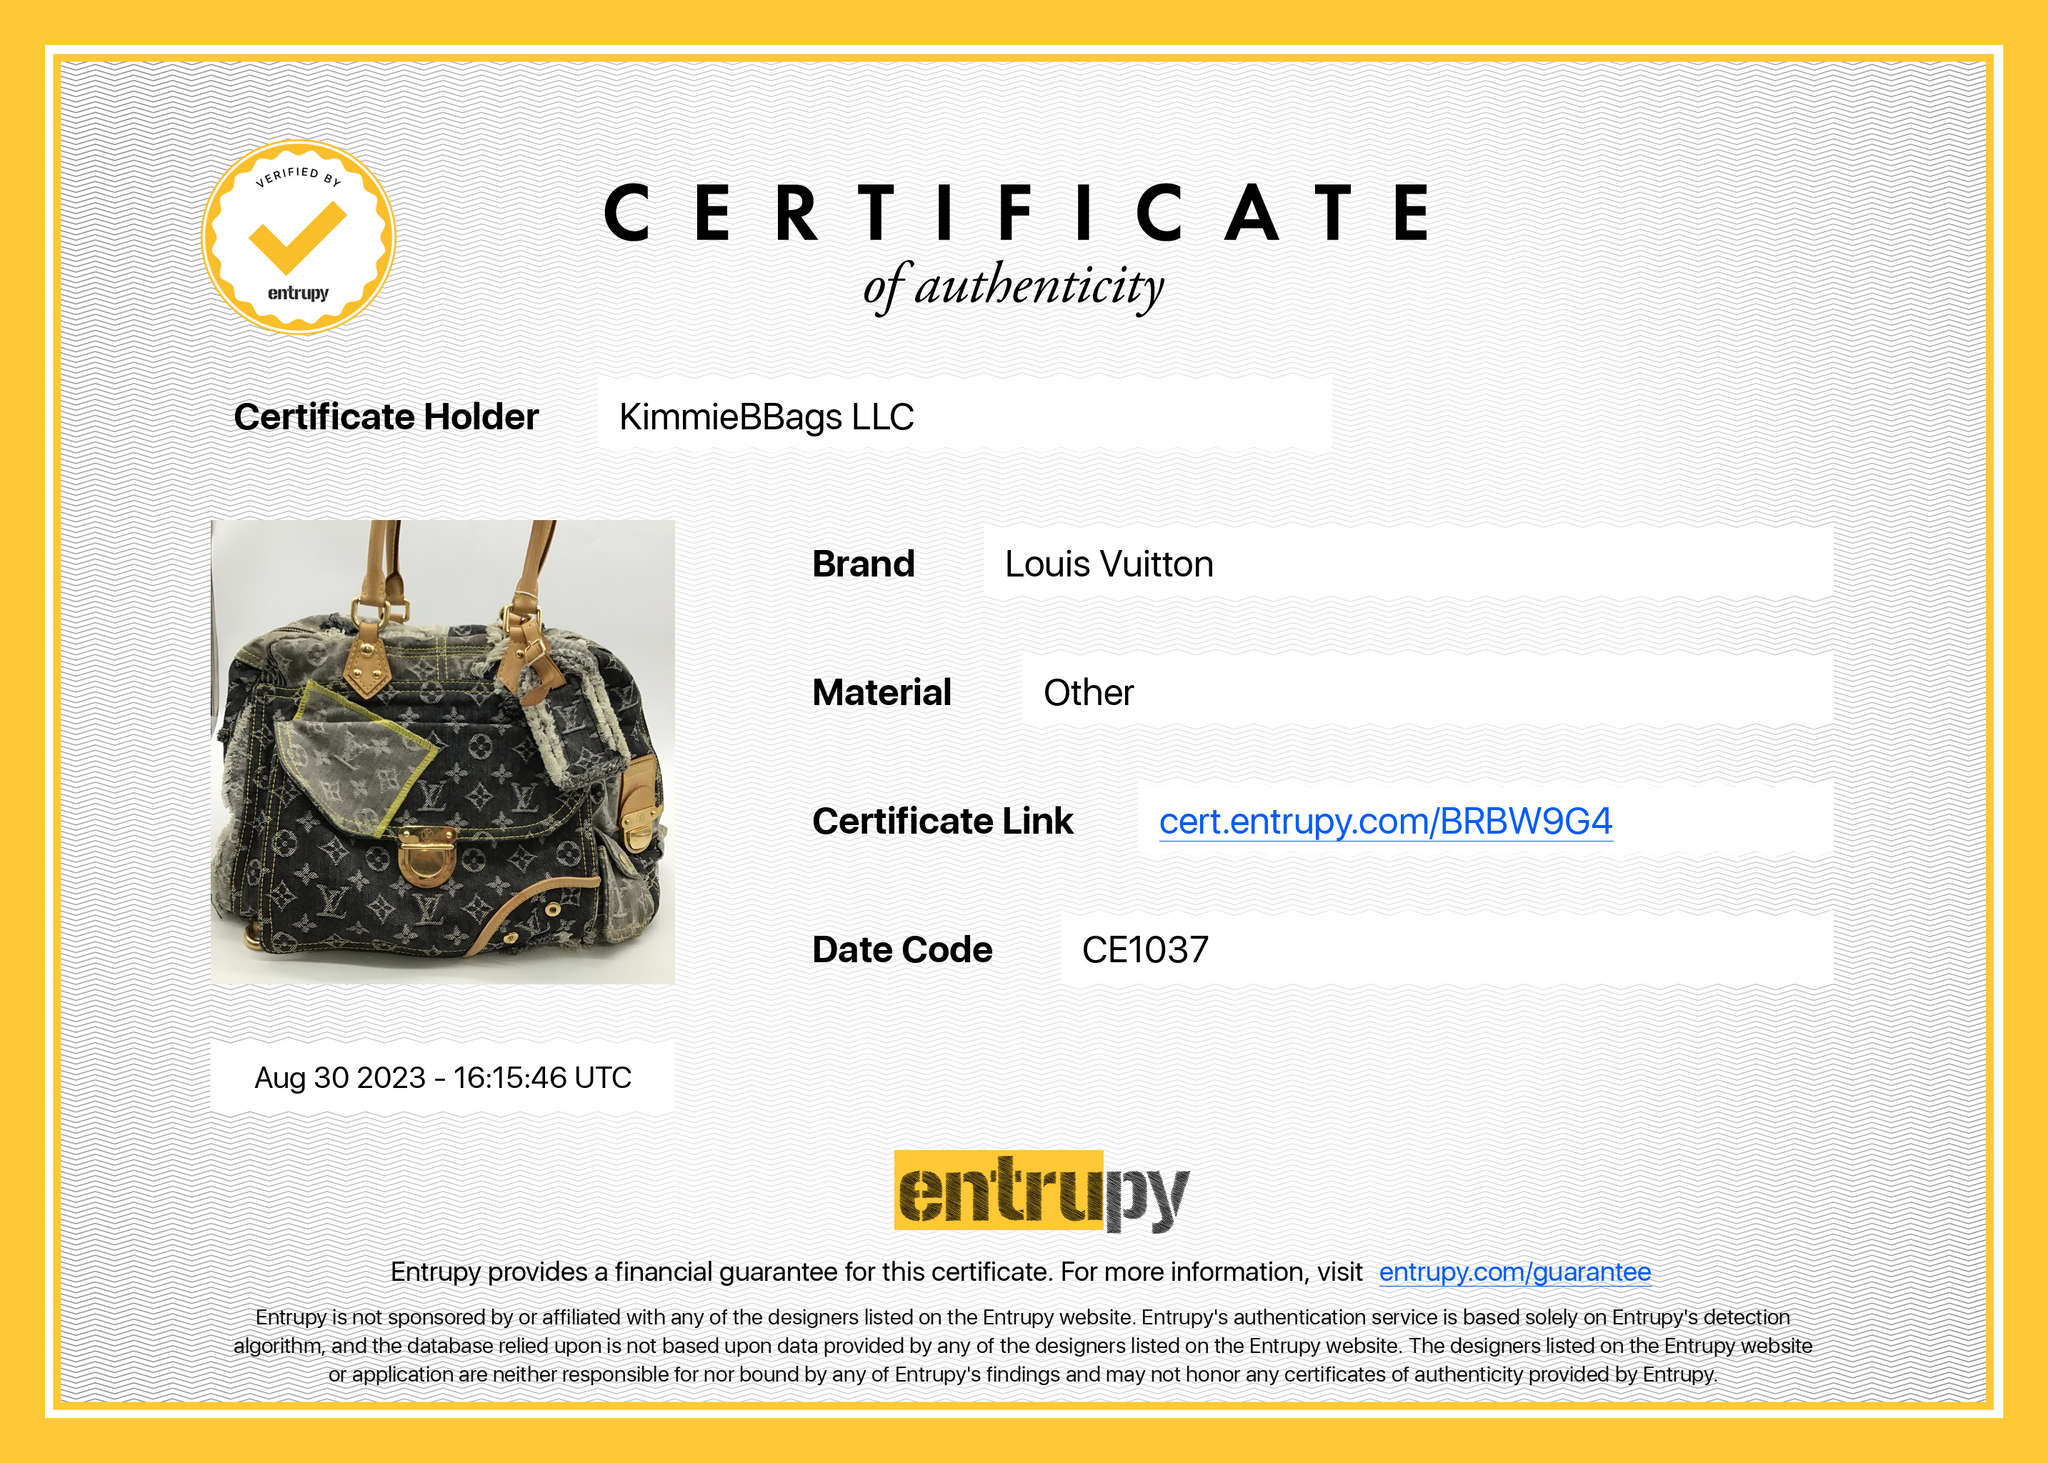 Louis Vuitton Blue And Red Damier Monogram Patchwork Denim Neverfull MM  Gold Hardware, 2019 Available For Immediate Sale At Sotheby's